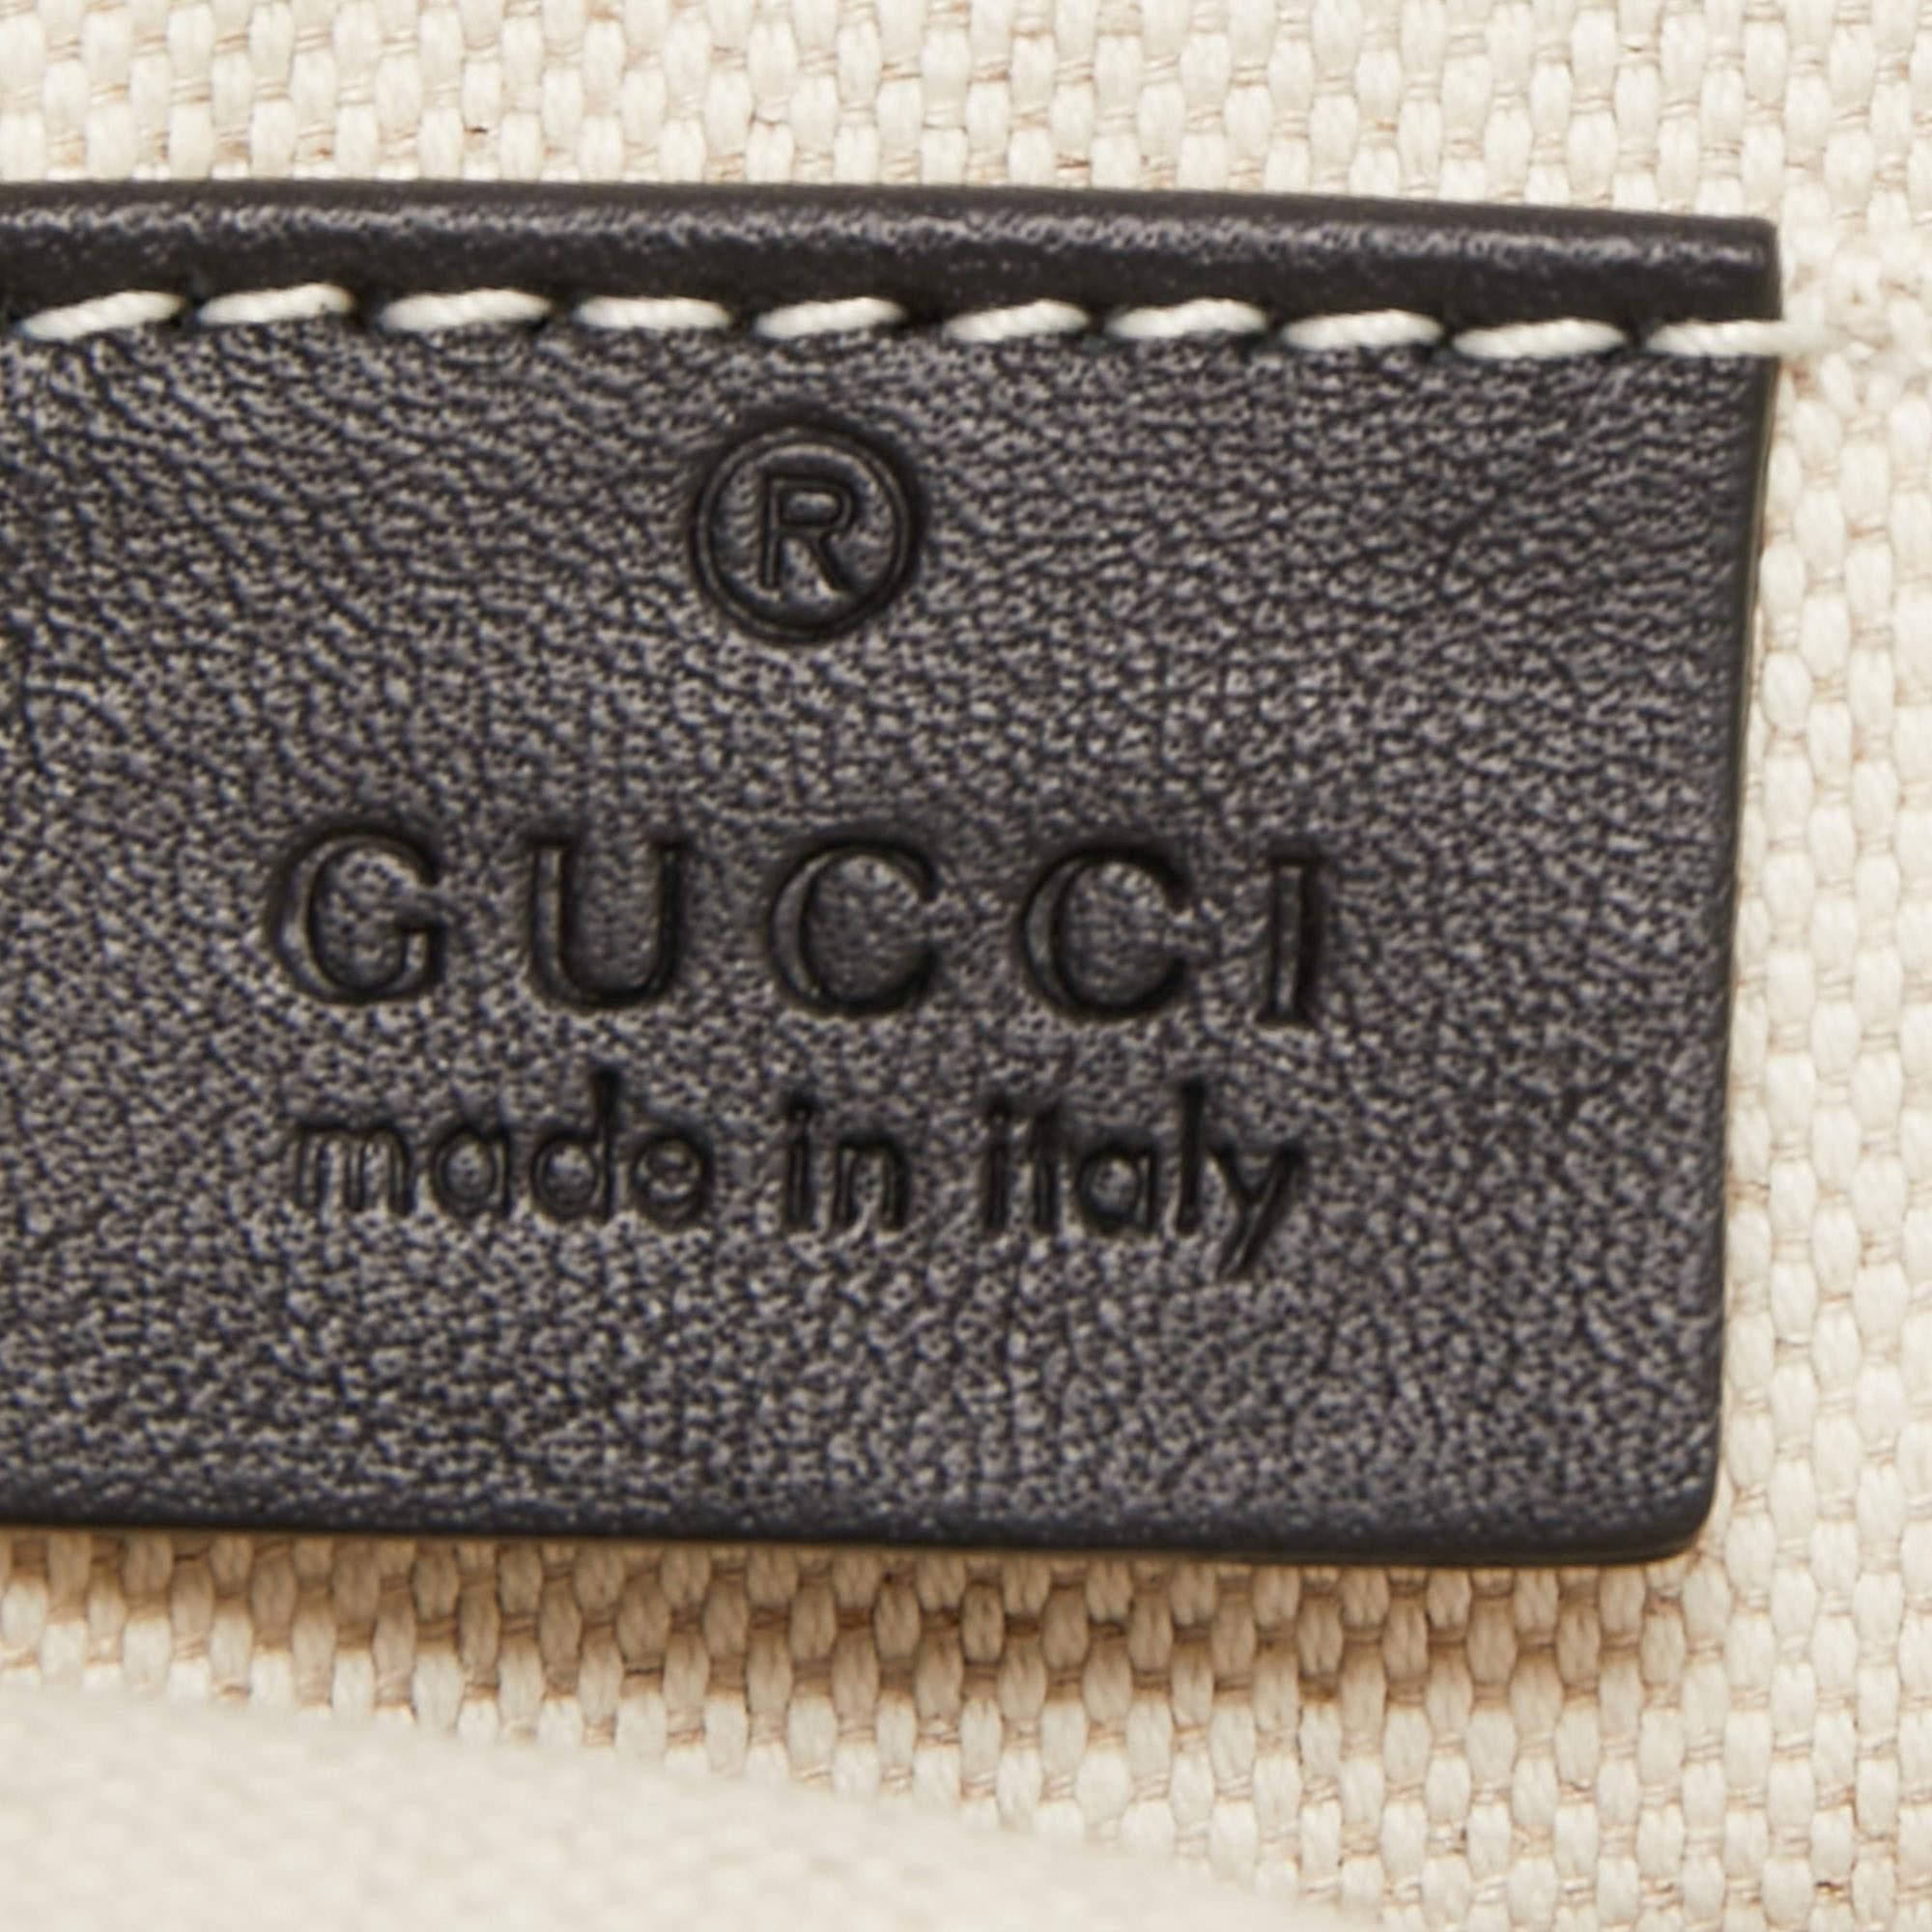 How to Spot a Fake Gucci Bag | The Study